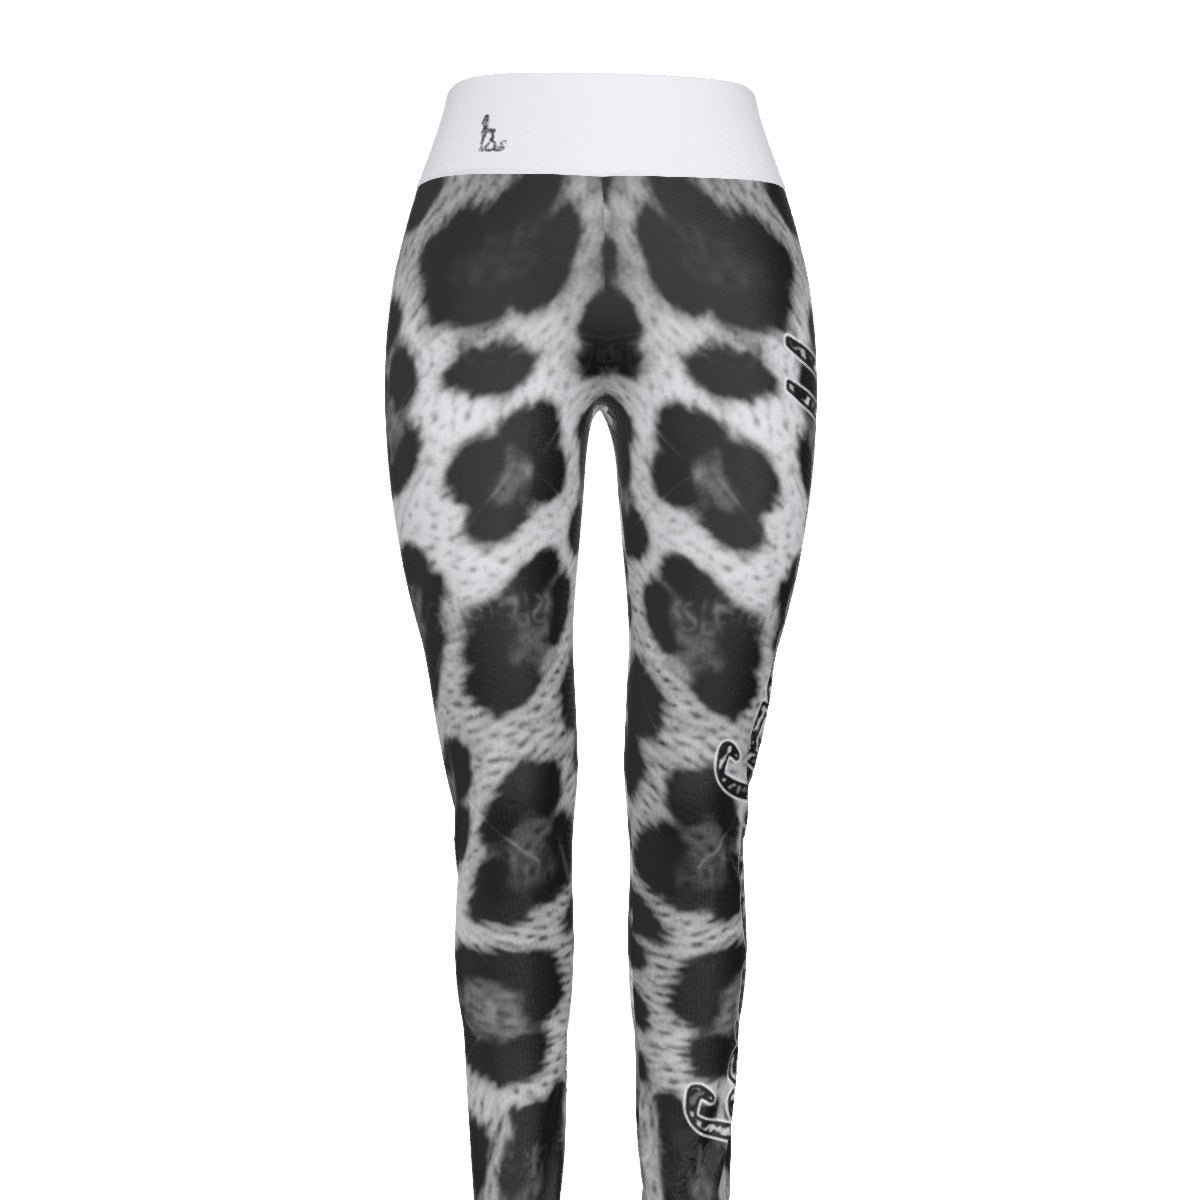 Officially Sexy Snow Leopard Print Collection Women's White High Waist Leggings #2 (English) 1